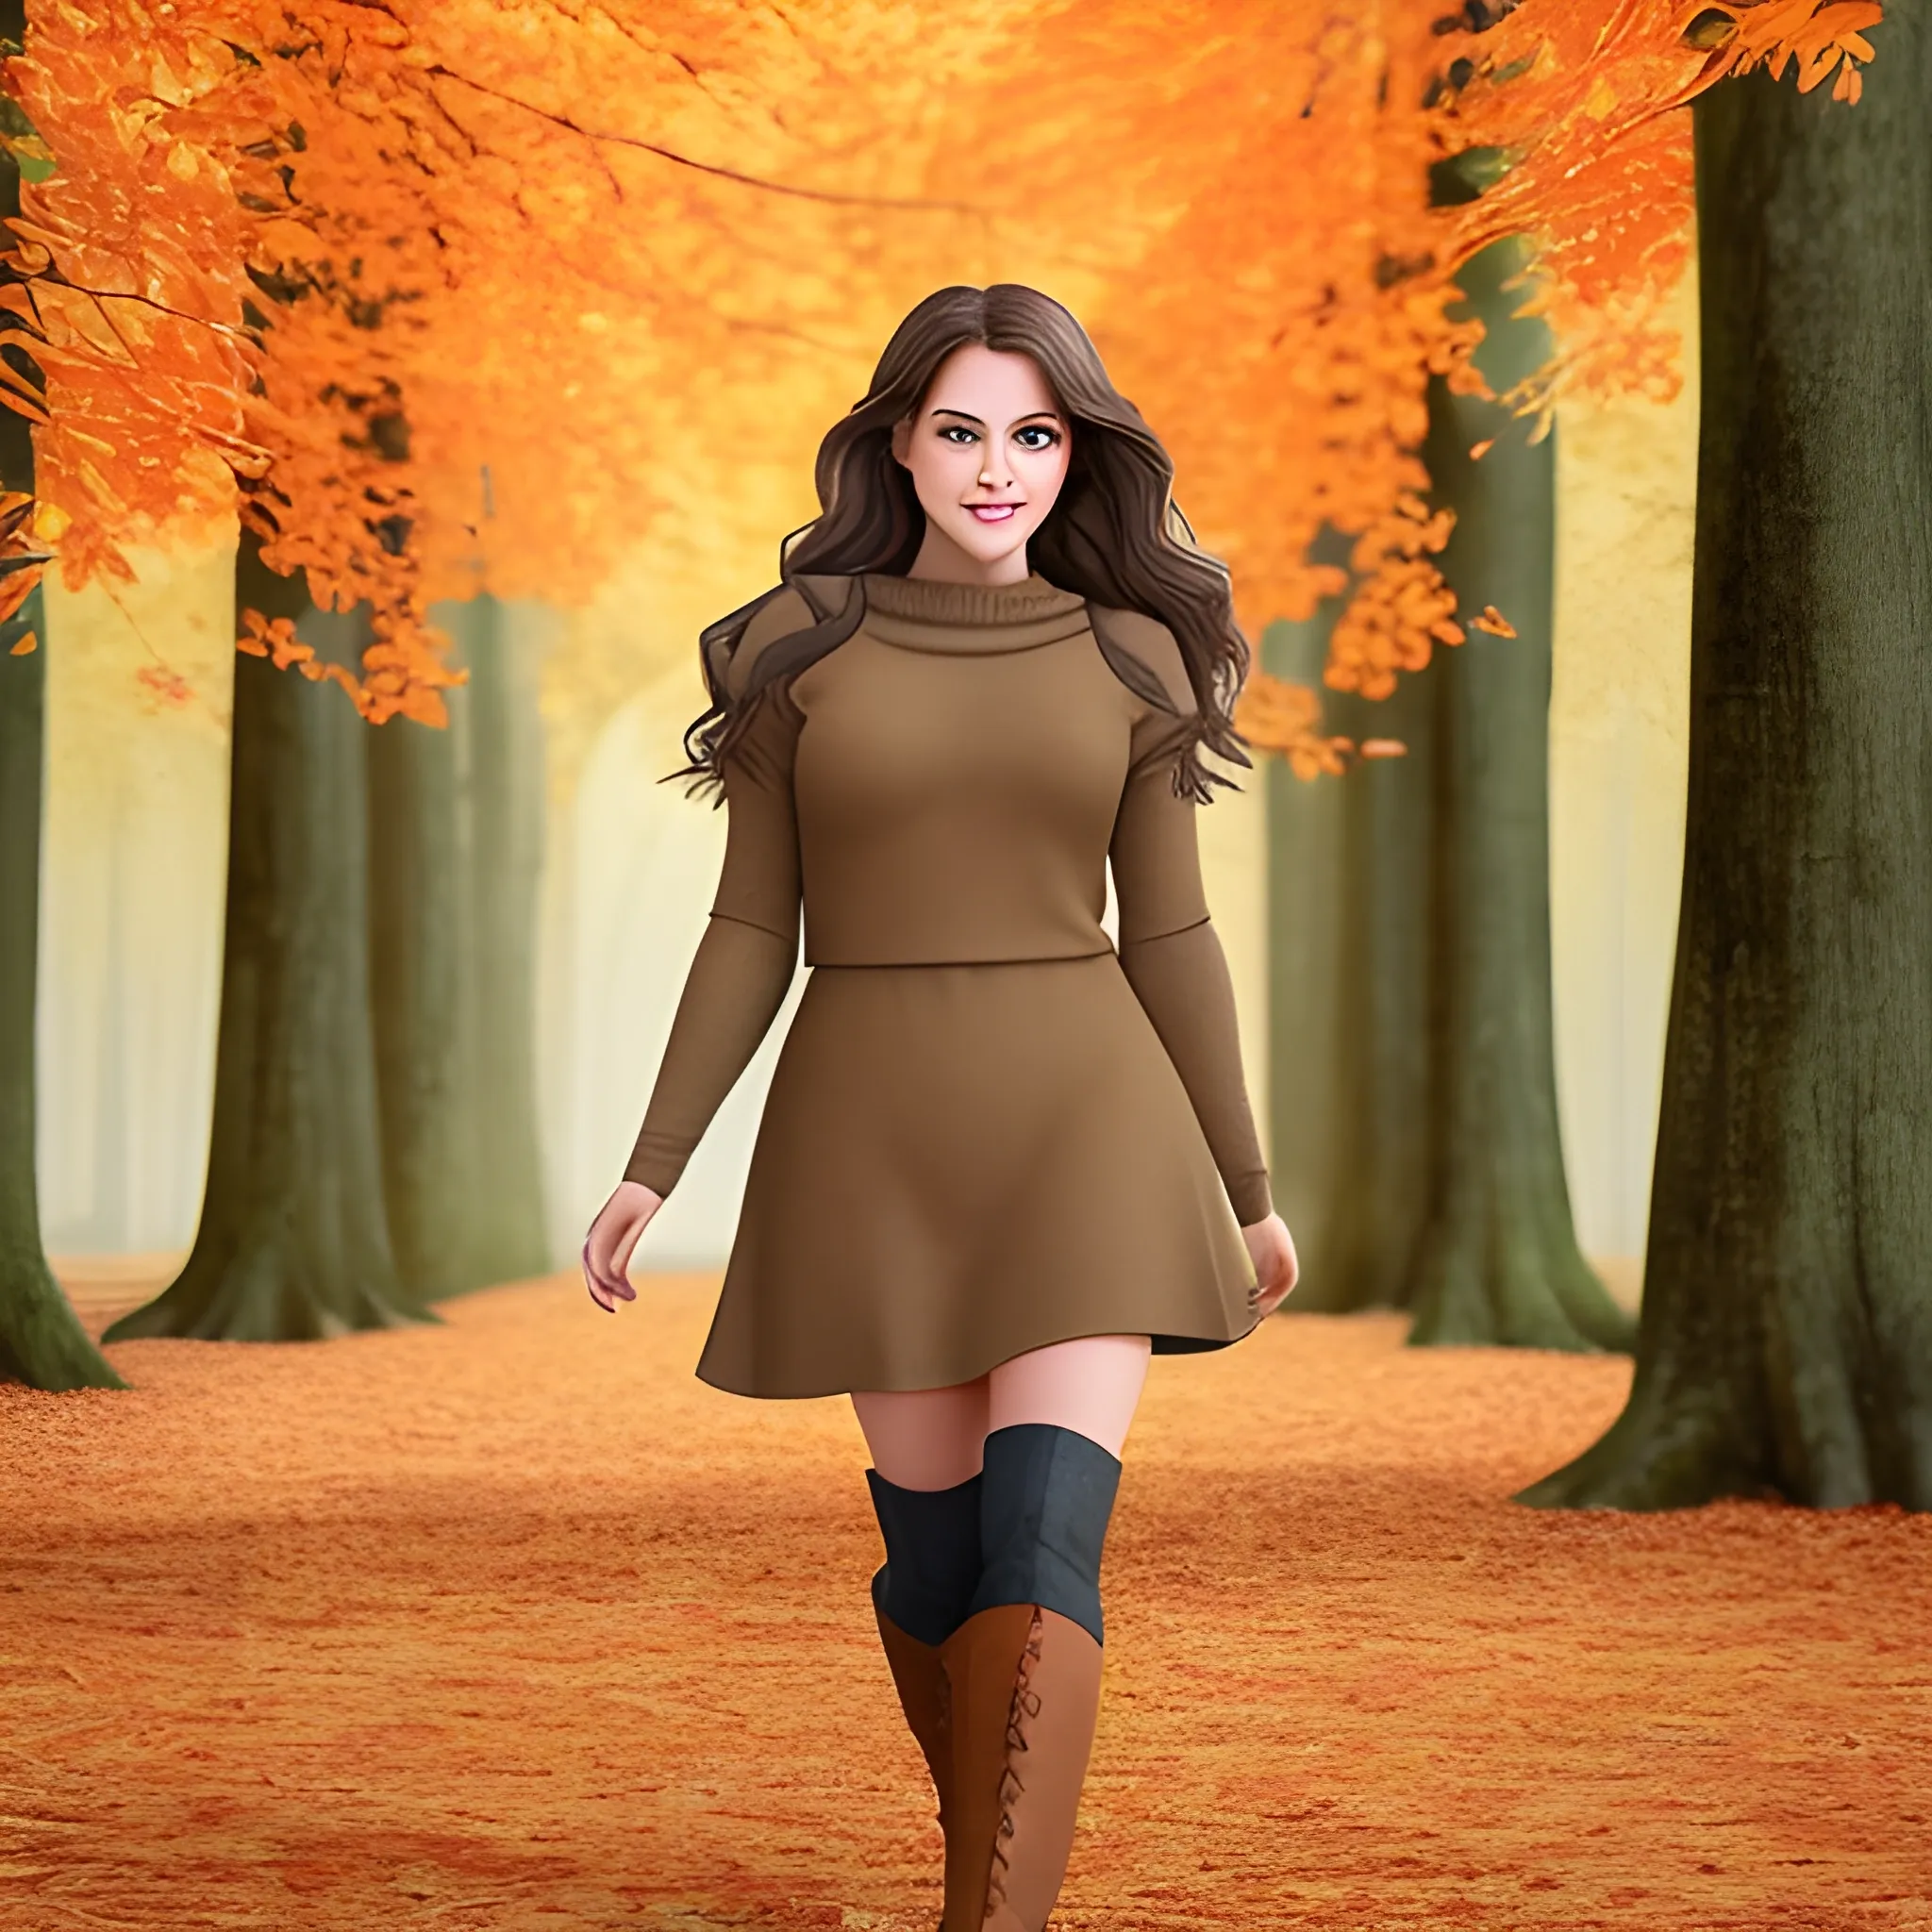 Generate full body photography of Autumn, the stunning brunette influencer. She should appear in her mid-20s approximately 5'4" tall with long, wavy chestnut hair that falls gracefully on her shoulders. She has an athletic hourglass figure accentuated by her full bust. Her complexion should be flawless, with a warm, sun-kissed tan. Autumn's expressive brown eyes should radiate charisma, and she should have a relaxed and confident demeanor. Autumn is adorned in attire that epitomizes the beauty of fall. She wears an elegant, form-fitting sweater dress in rich earthy brown that complements the vibrant foliage. The dress highlights her figure while providing comfort for her stroll through the autumn scenery. A pair of knee-high leather boots adds a touch of rustic chic to her ensemble.

The surroundings are a testament to the splendor of autumn. Autumn's walk takes her through a serene forest, where trees dressed in an array of fiery reds, burnt oranges, and deep yellows create a breathtaking backdrop. The ground is carpeted with fallen leaves, creating a delightful rustling underfoot as she moves along. The warm, golden sunlight filters through the canopy, casting dappled patterns on the forest floor.

Autumn should walking through the seasonal foliage. She may be photographed gazing at the vibrant leaves, twirling playfully, or simply taking in the natural beauty with an appreciative smile. The images should evoke a sense of wonder, serenity, and the magic of fall.

Intense look and makeup, smiling, serene expressions, symmetrical eyes, symmetrical face, photorealistic, photography, path tracing, specular lighting, volumetric face light, path traced hair, visible shadows, intricate, elaborate, hyper-realistic.